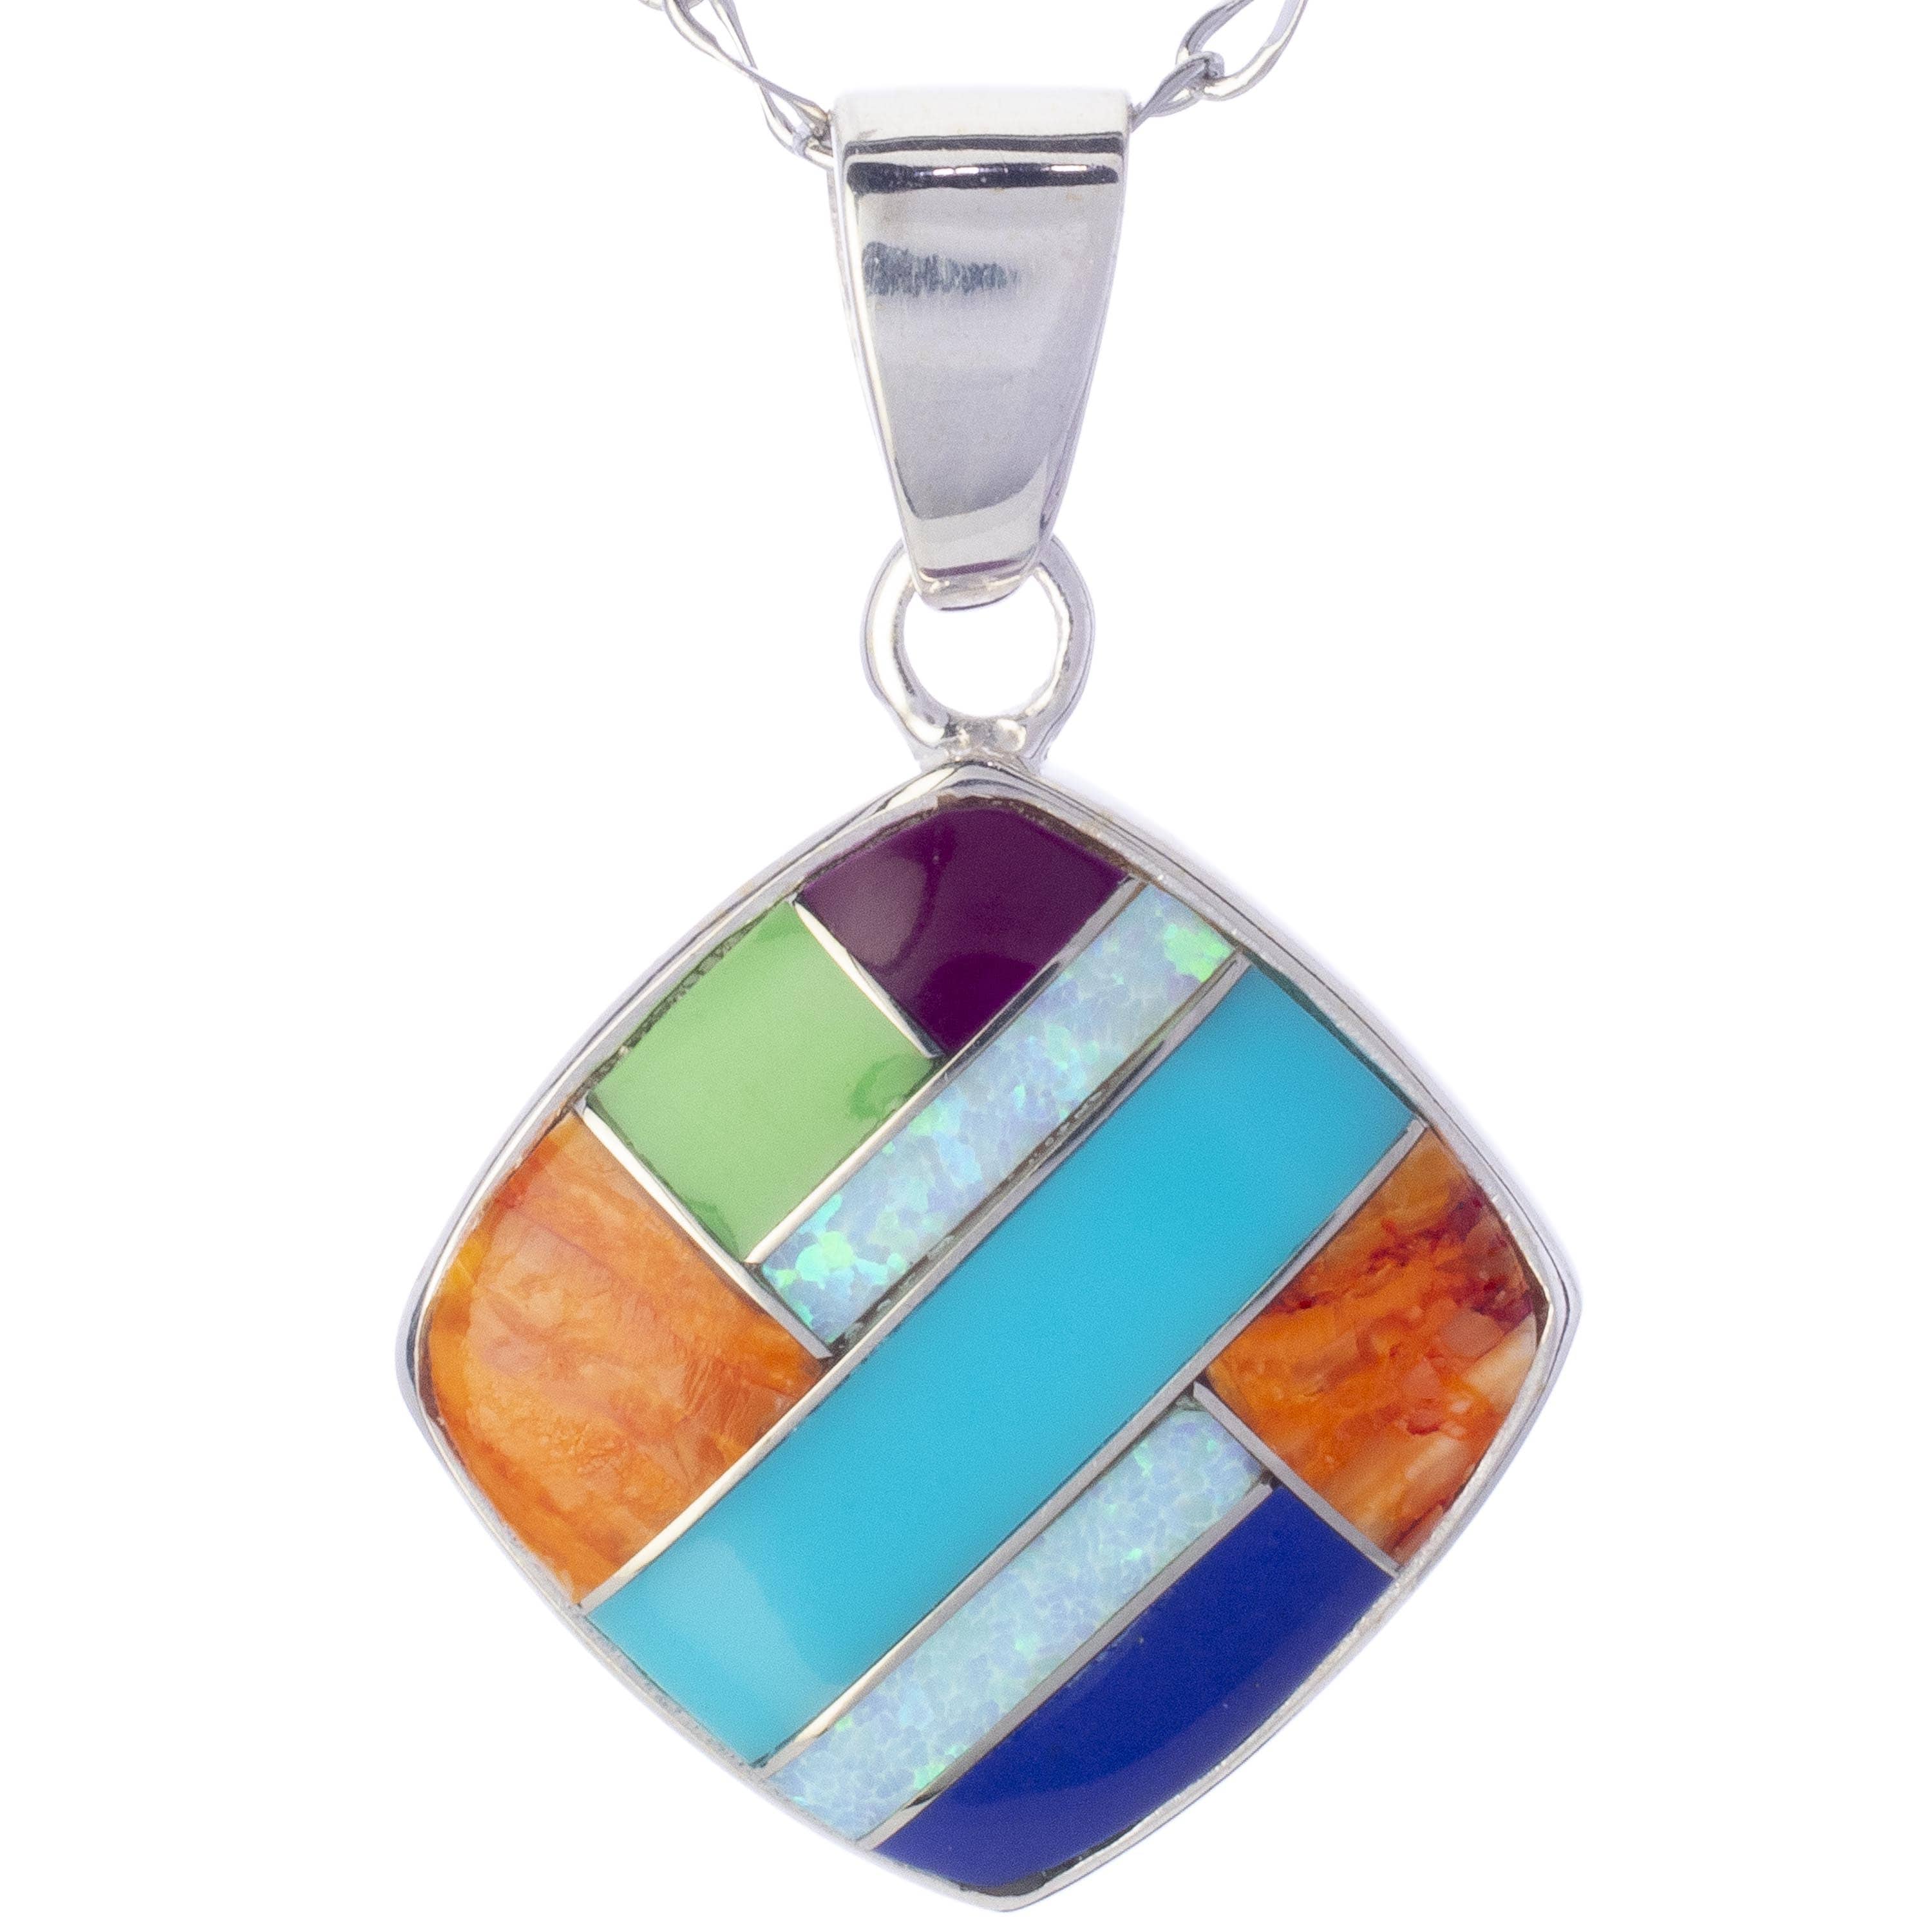 Kalifano Southwest Silver Jewelry Multi Gemstone 925 Sterling Silver Pendant USA Handmade with Opal Accent NMN.2241.MT